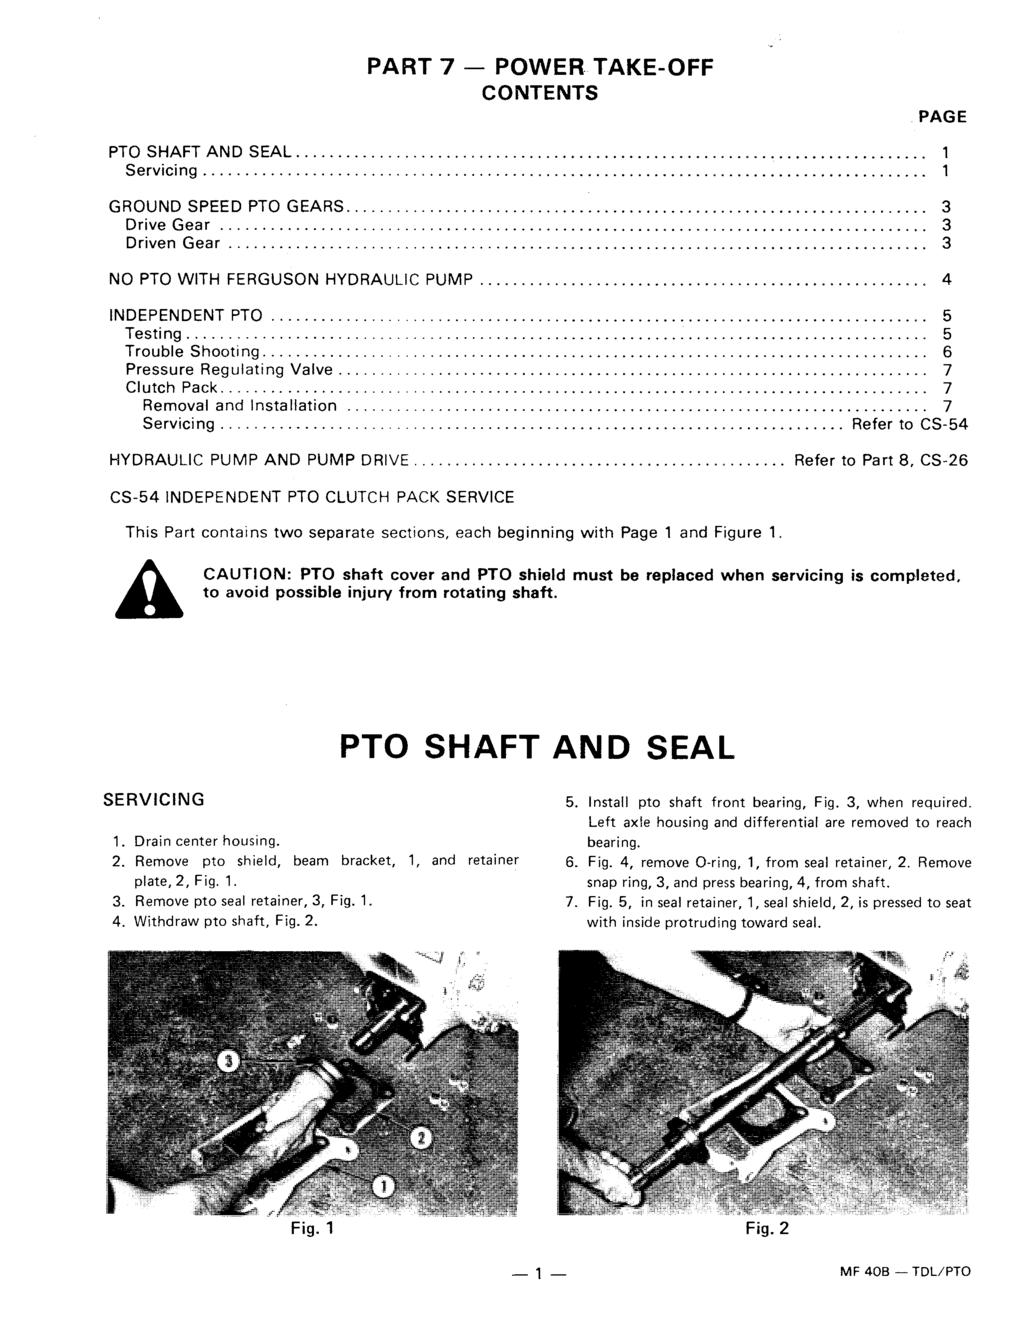 PART 7 - POWER.TAKE-OFF. PTO SHAFT AND SEAL...,... 1 Servicing... 1 GROUND SPEED PTO GEARS...................................................................... Drive Gear..................................................................................... Driven Gear.